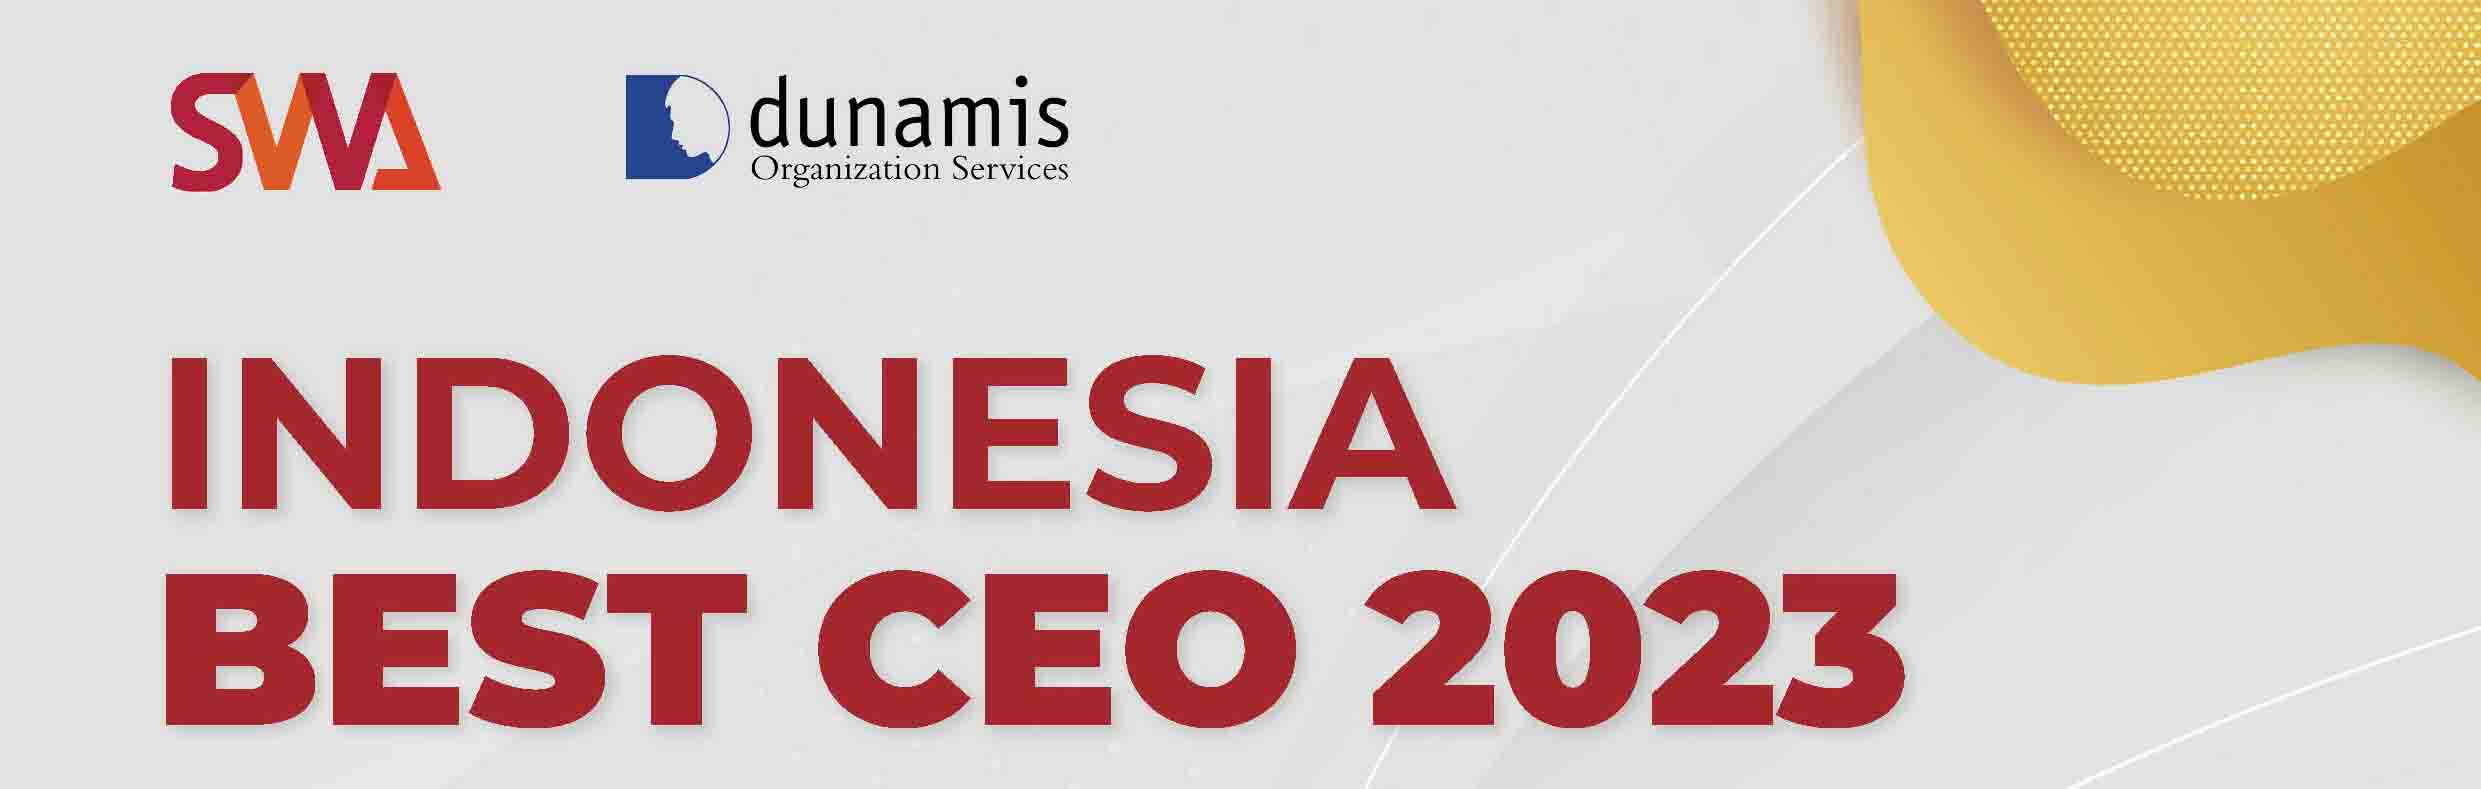 INDONESIA BEST CEO 2023